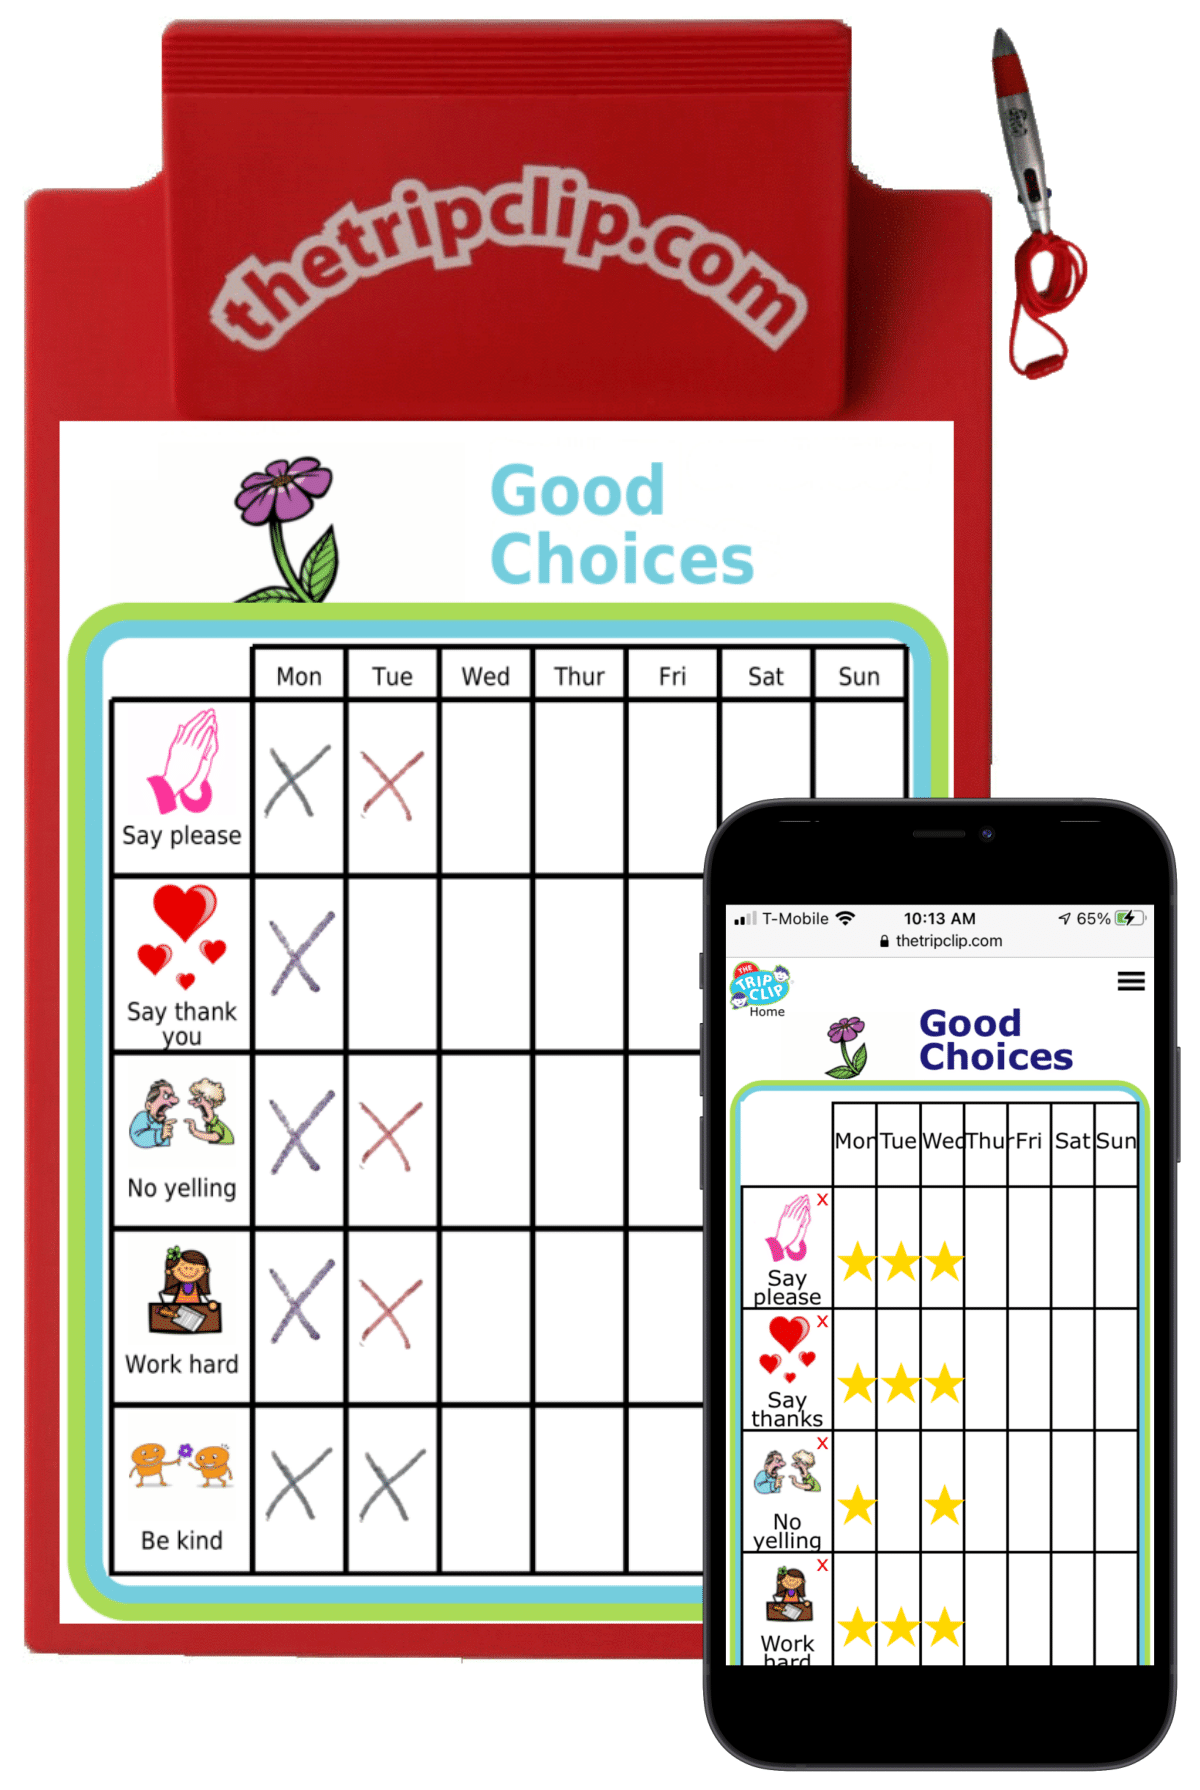 Picture checklist of weekly good choices chart